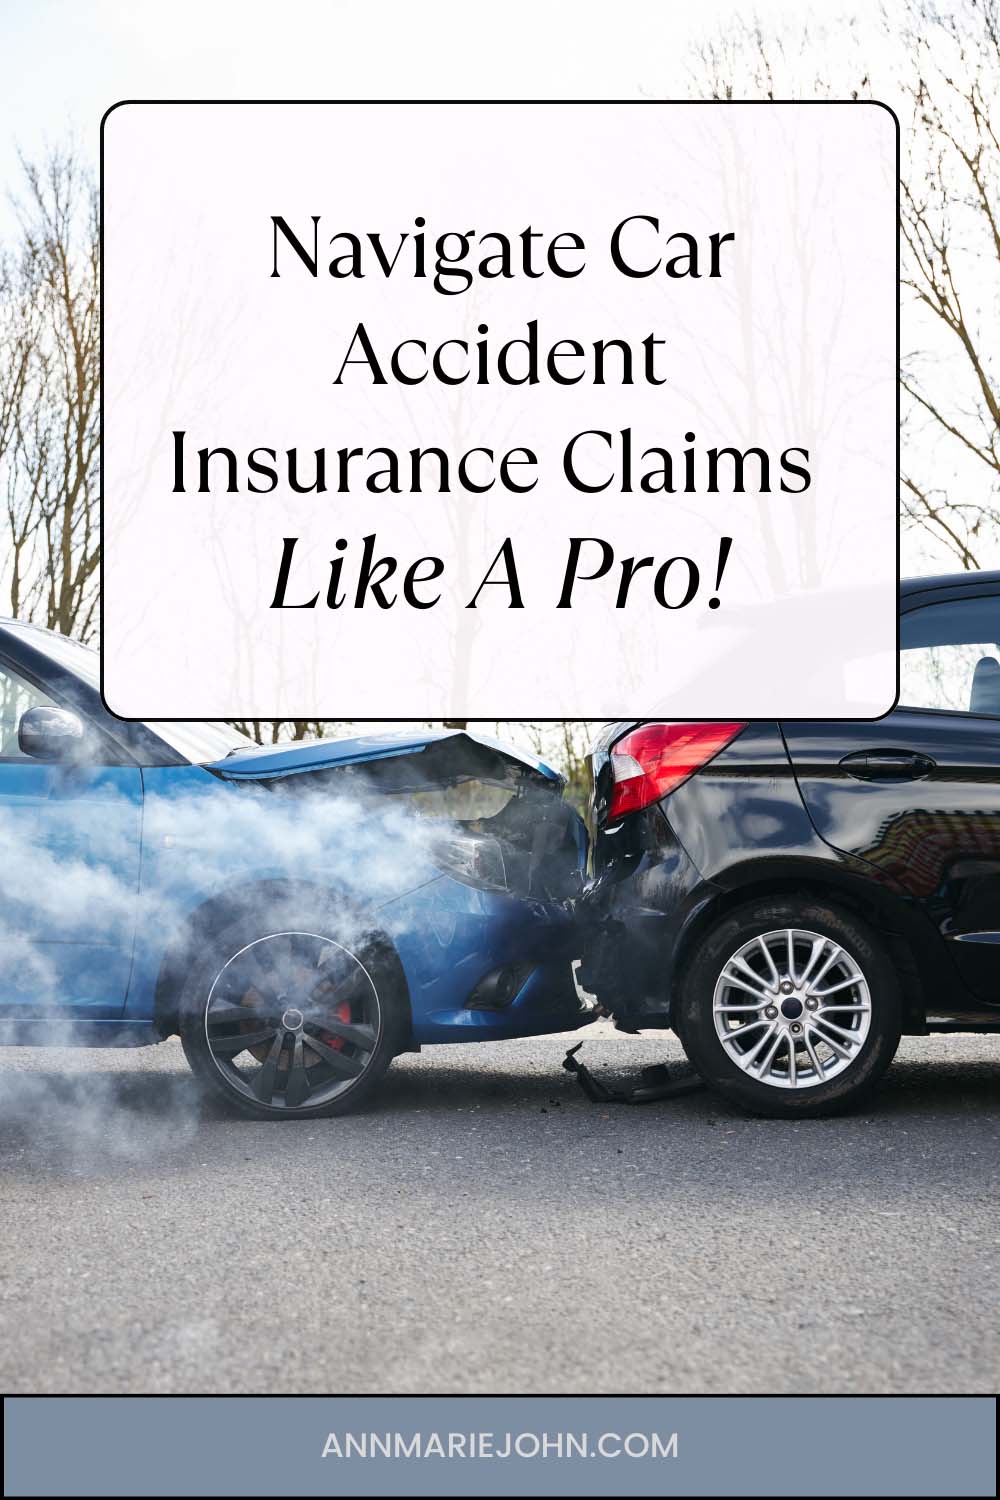 Navigate Car Accident Insurance Claims Like a Pro!